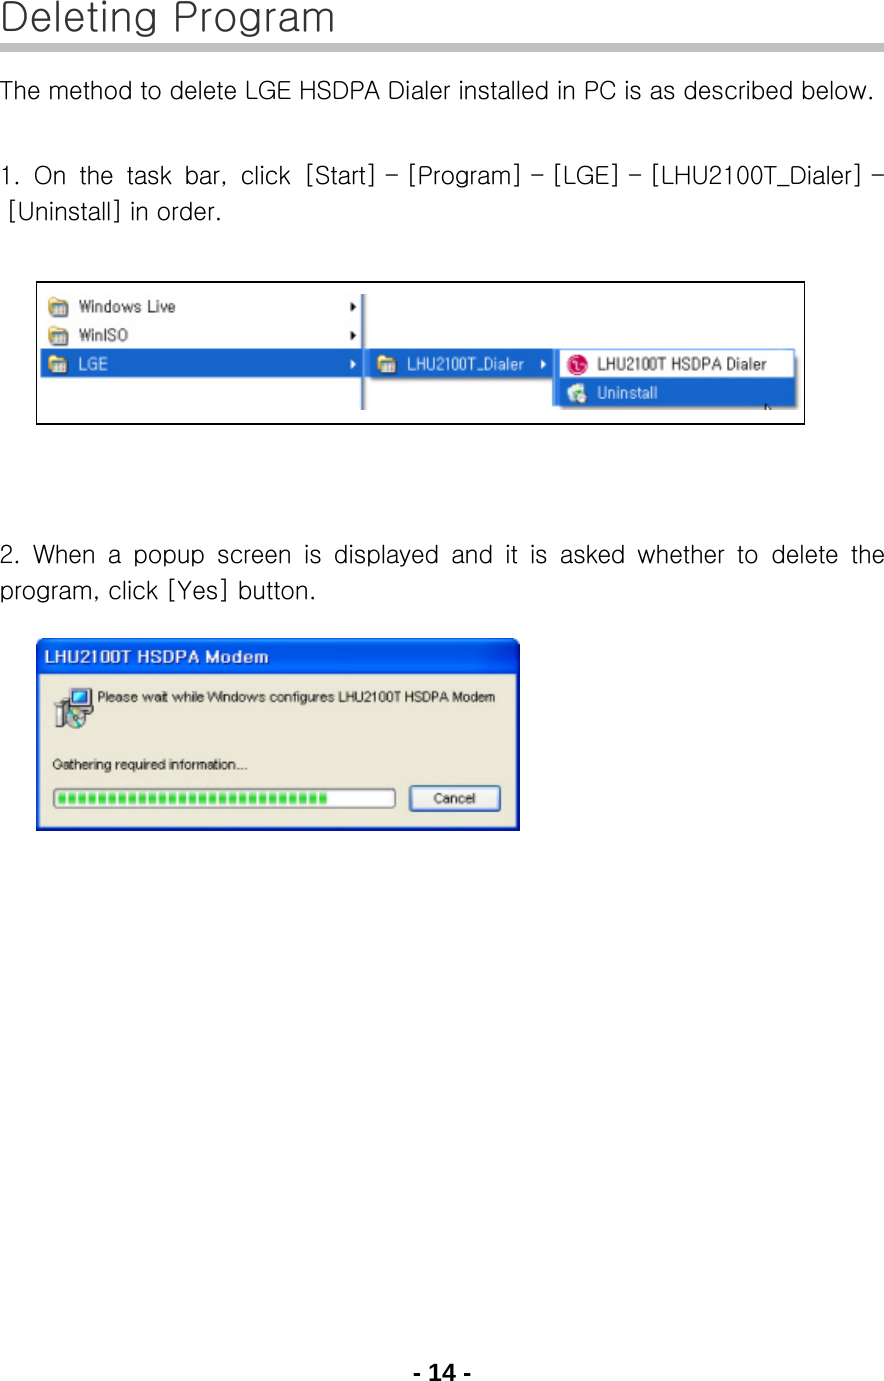 - 14 -  Deleting Program The method to delete LGE HSDPA Dialer installed in PC is as described below.  1.  On  the  task  bar,  click  [Start] - [Program] - [LGE] - [LHU2100T_Dialer] - [Uninstall] in order.        2.  When  a  popup  screen  is  displayed  and  it  is  asked  whether  to  delete  the program, click [Yes] button.         